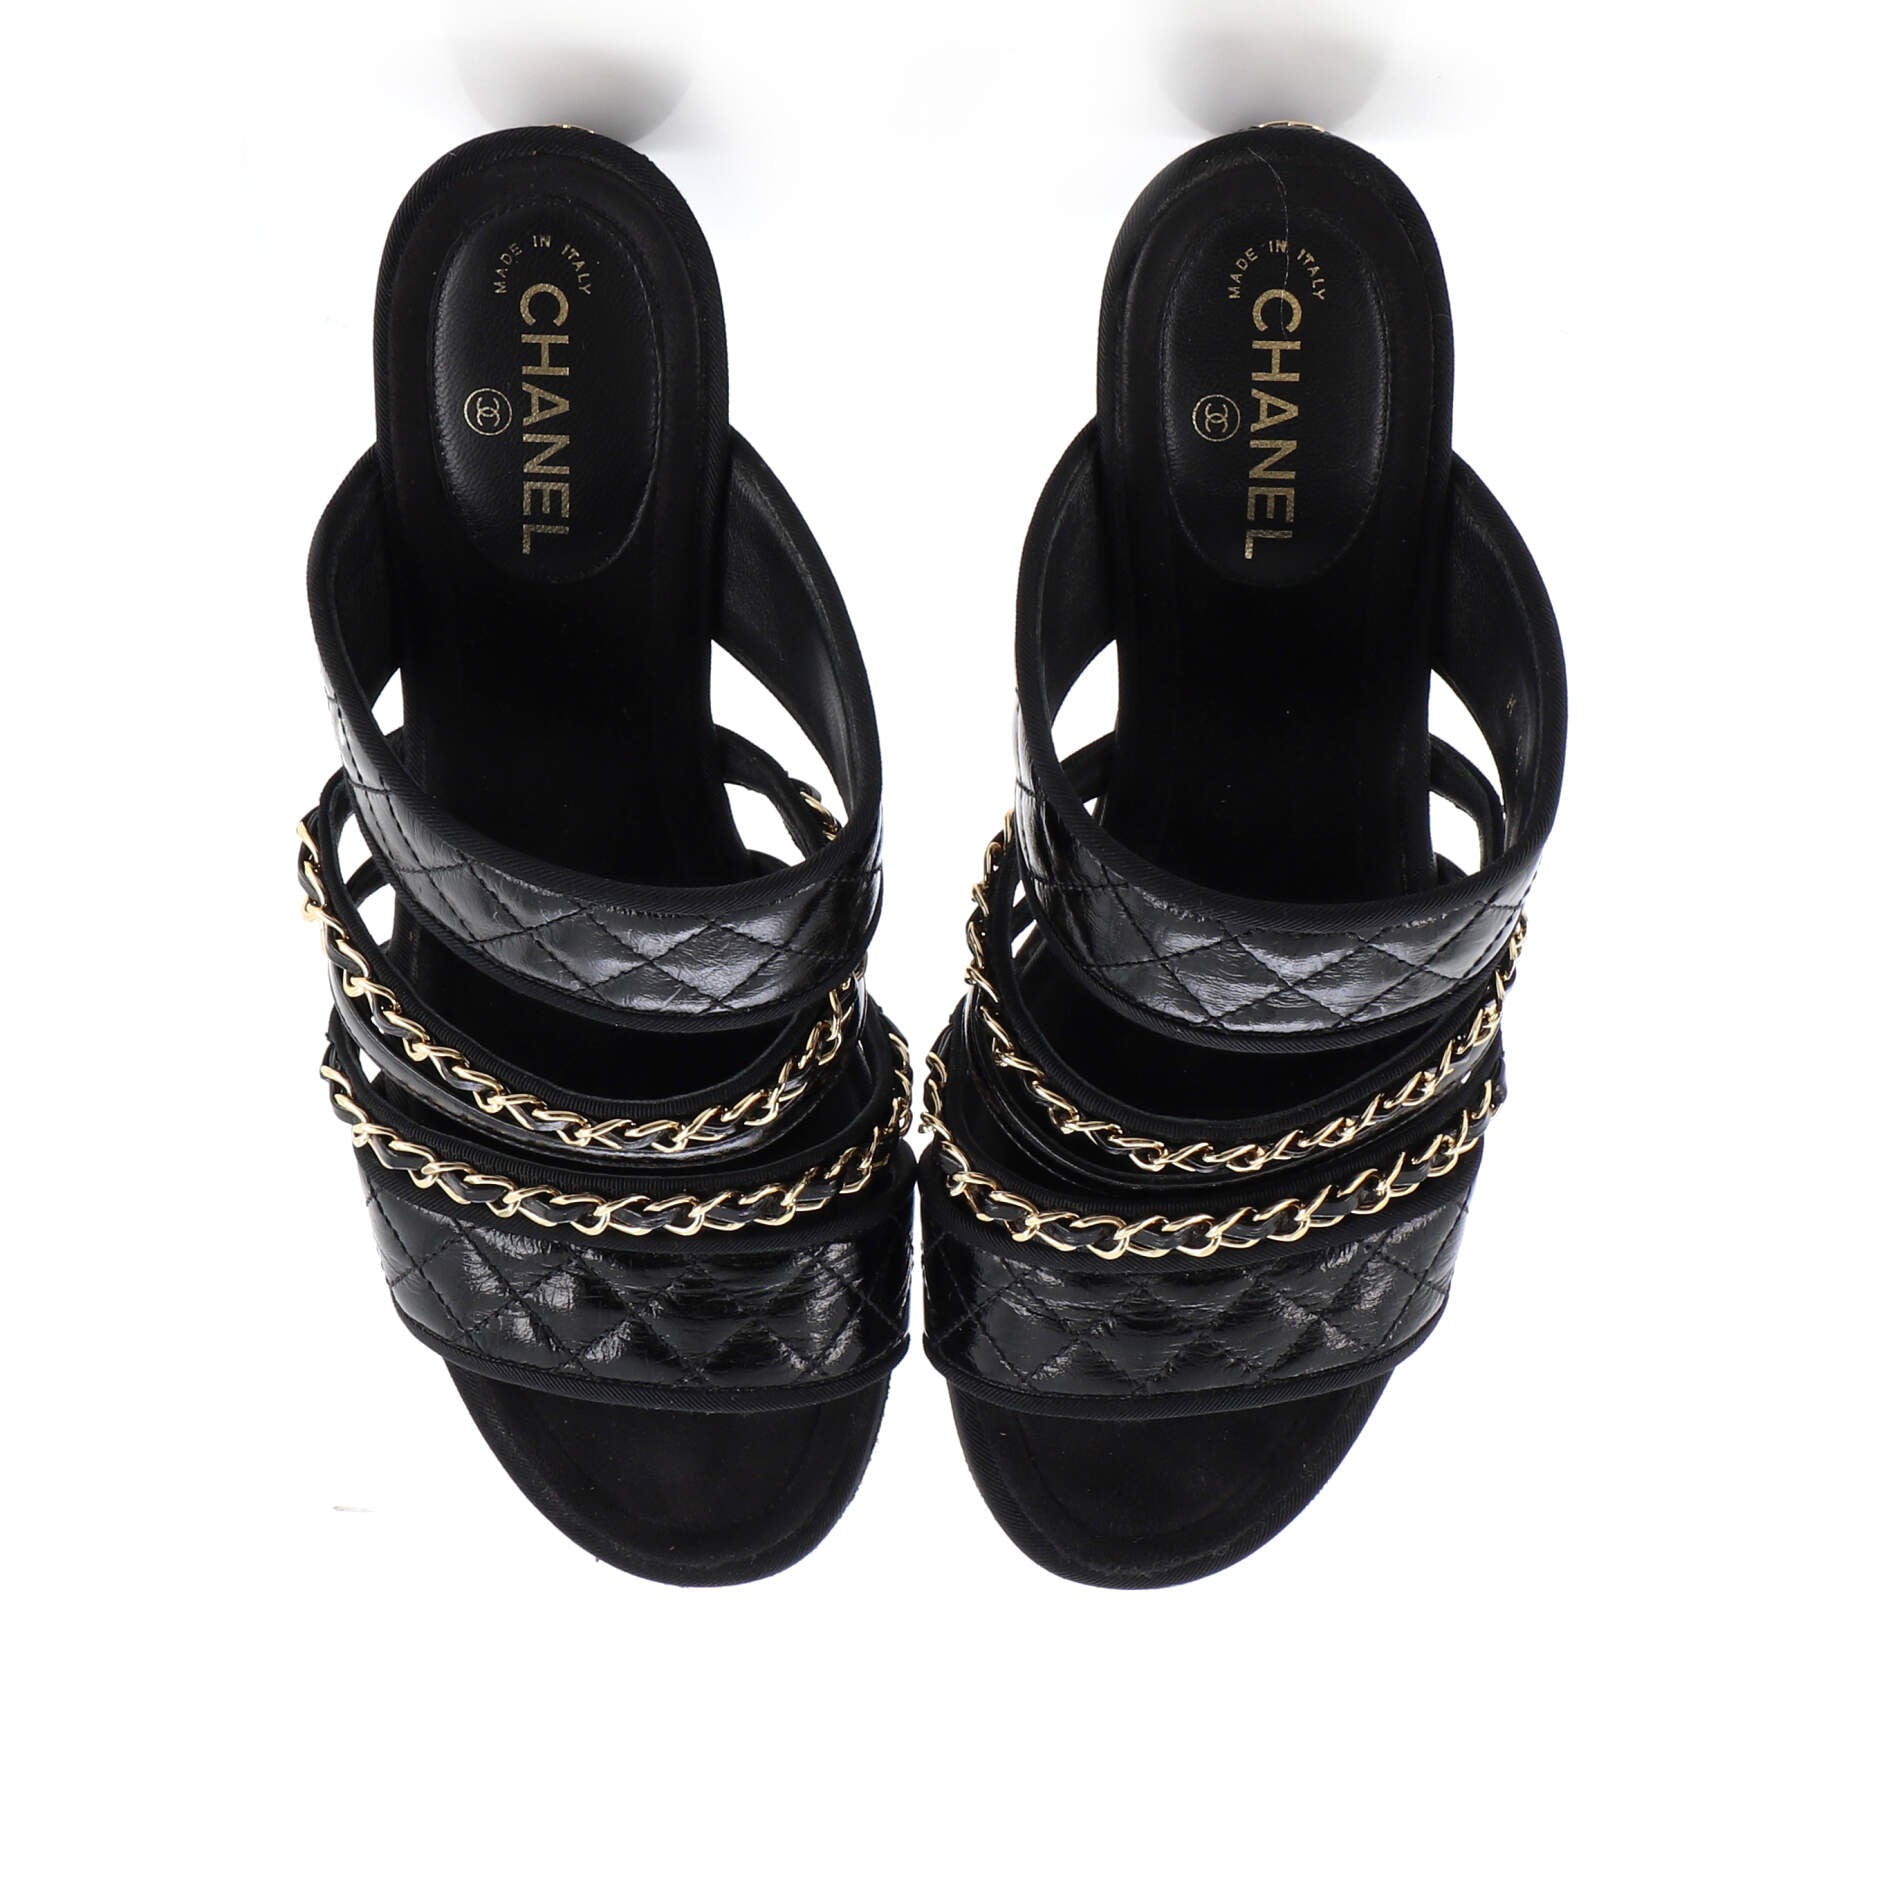 Chanel Silver Metallic Leather Straps Sandals Heels with Gold CC Logo